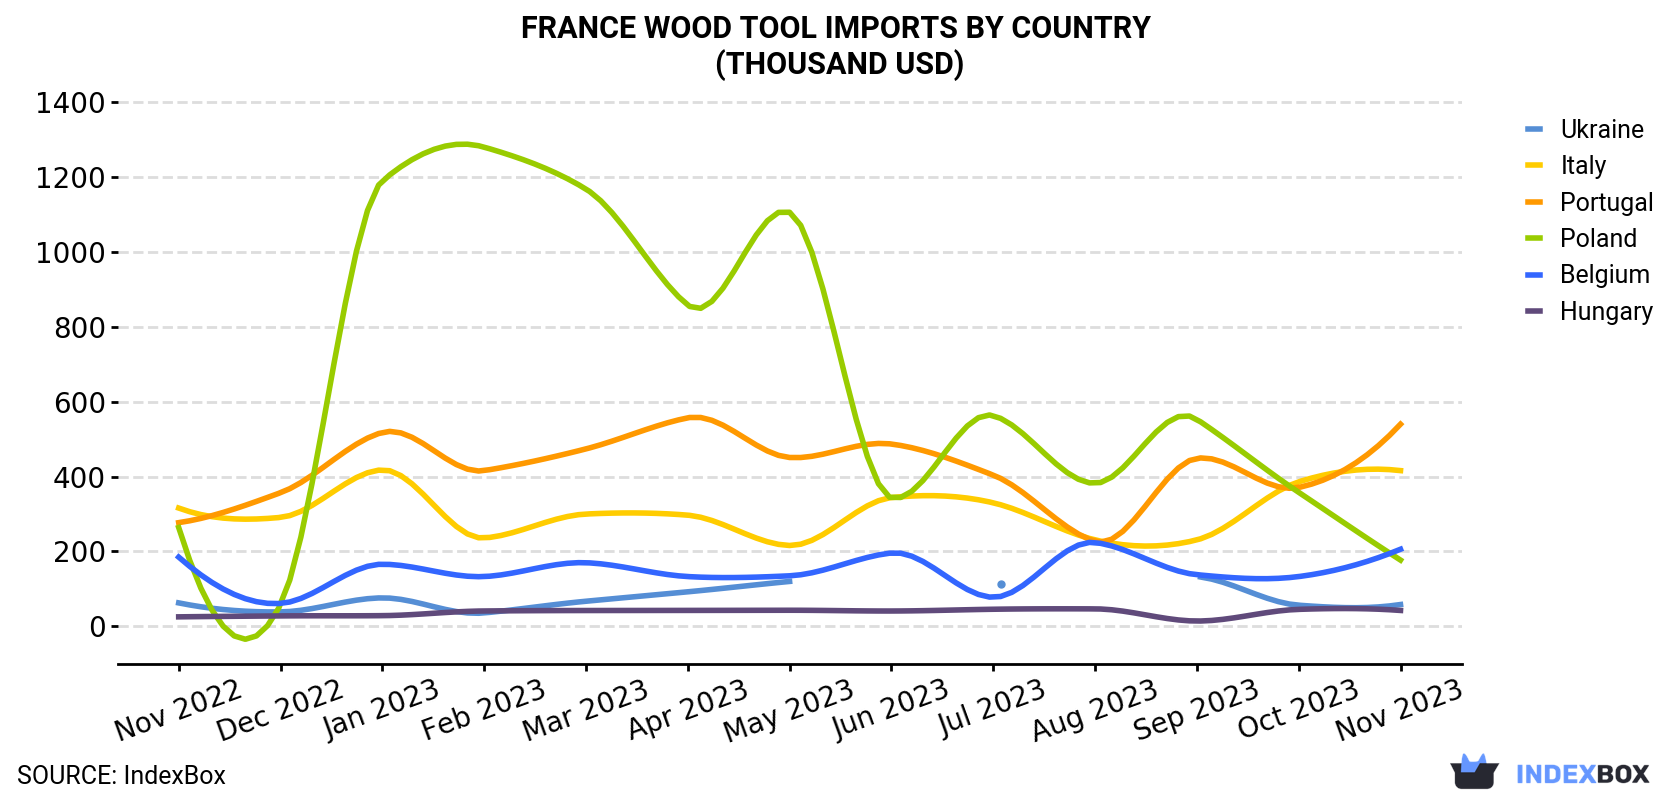 France Wood Tool Imports By Country (Thousand USD)